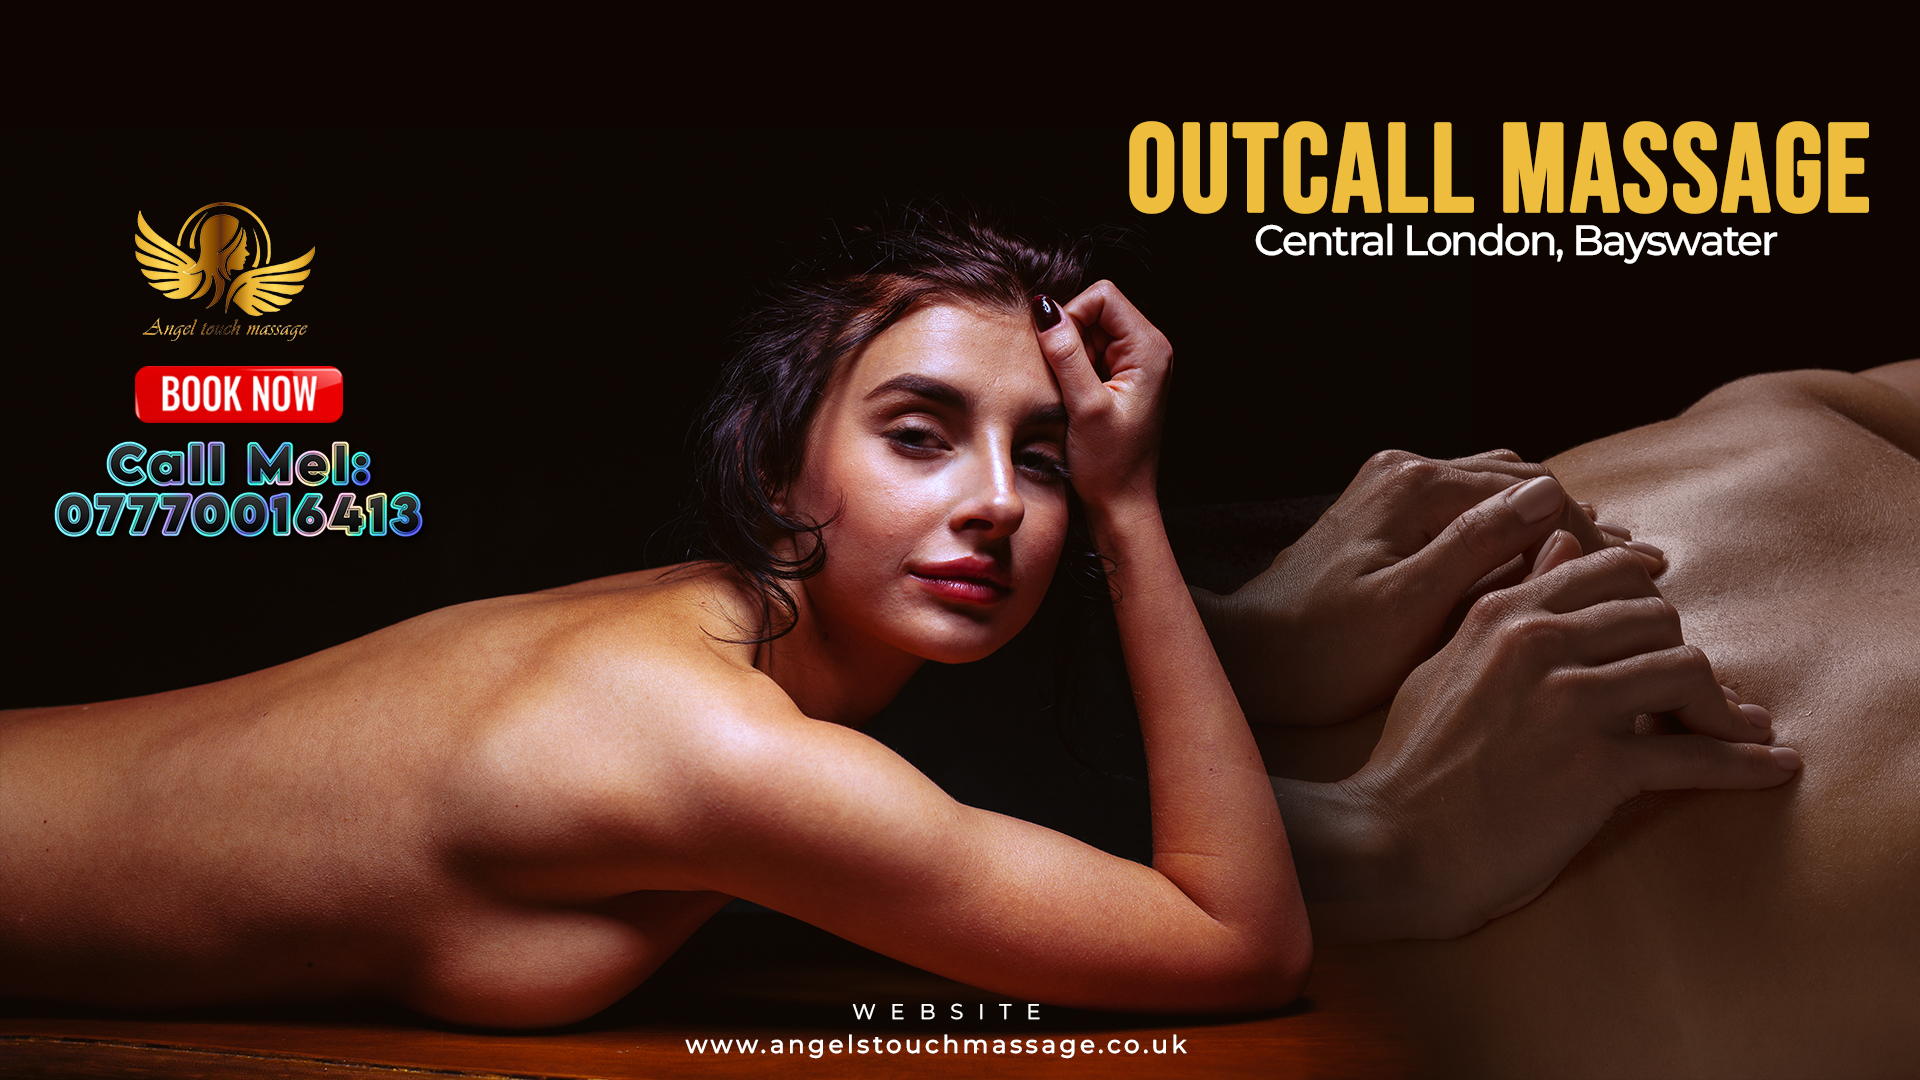 Outcall, Erotic massage London, Bayswater